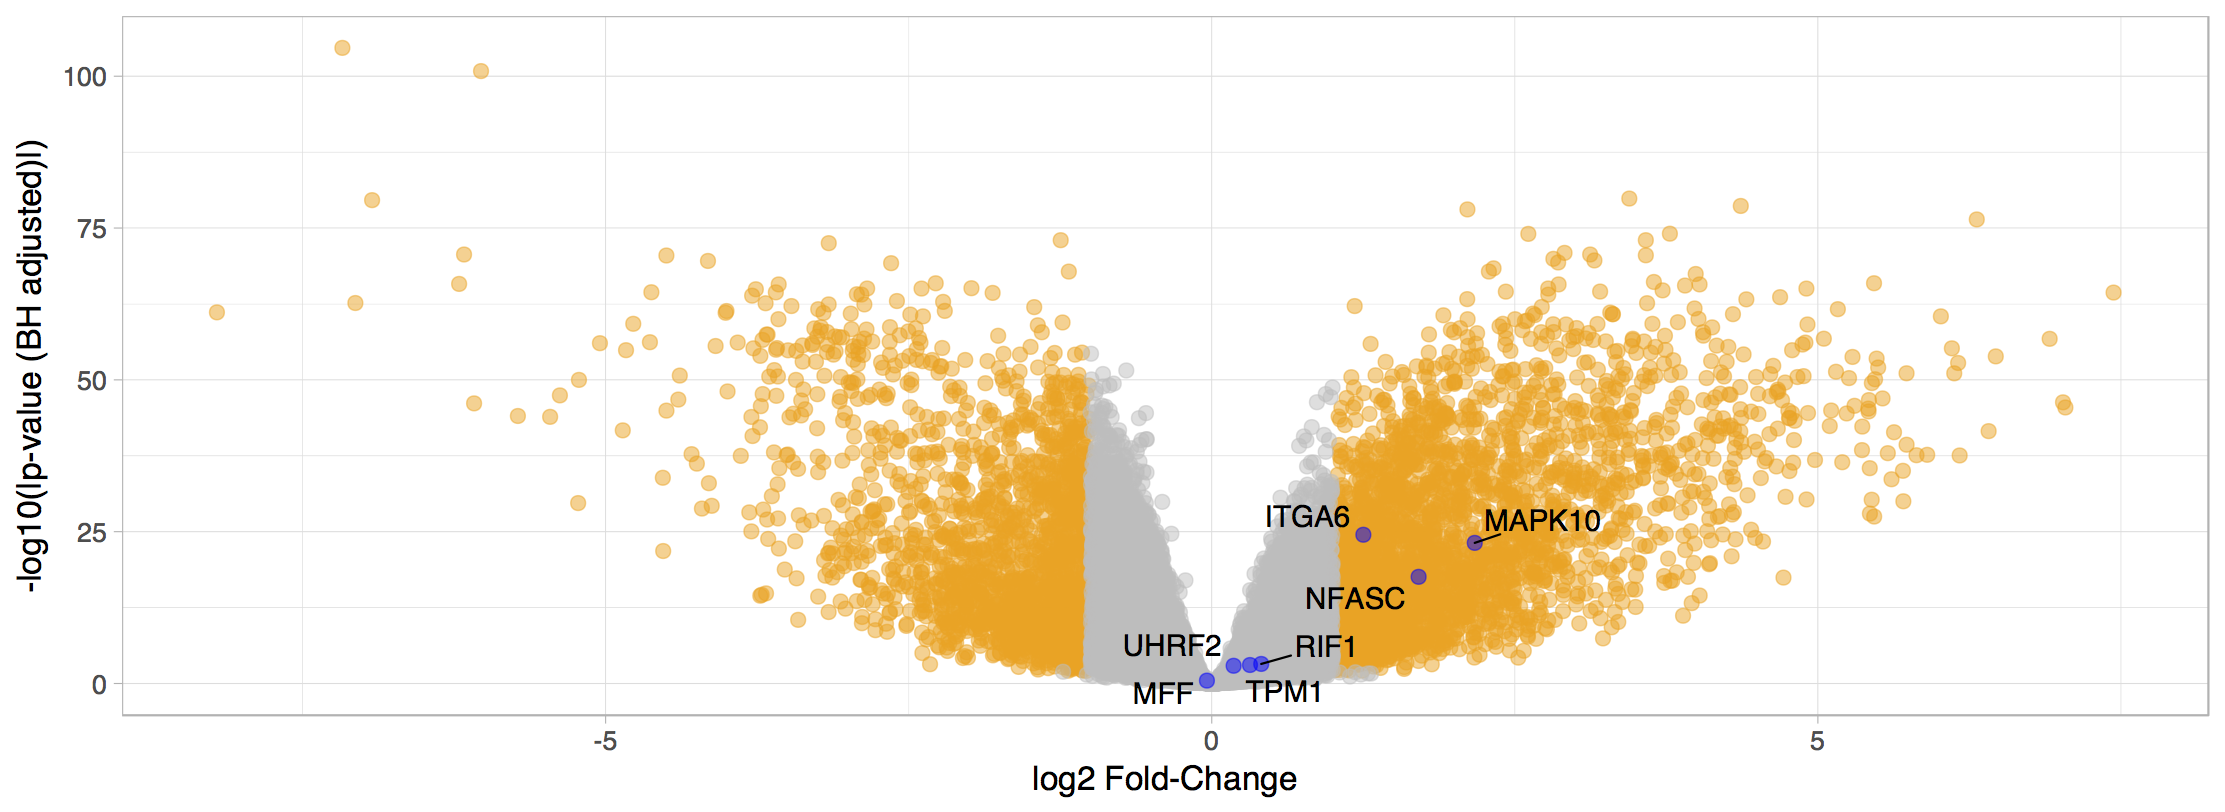 Differentially expressed genes (|log2(Fold-change)| >
1 and FDR ≤ 0.01). Labelled genes are those with alternative splicing
events with putative prognostic value.” width=“800pt” />
<p class=